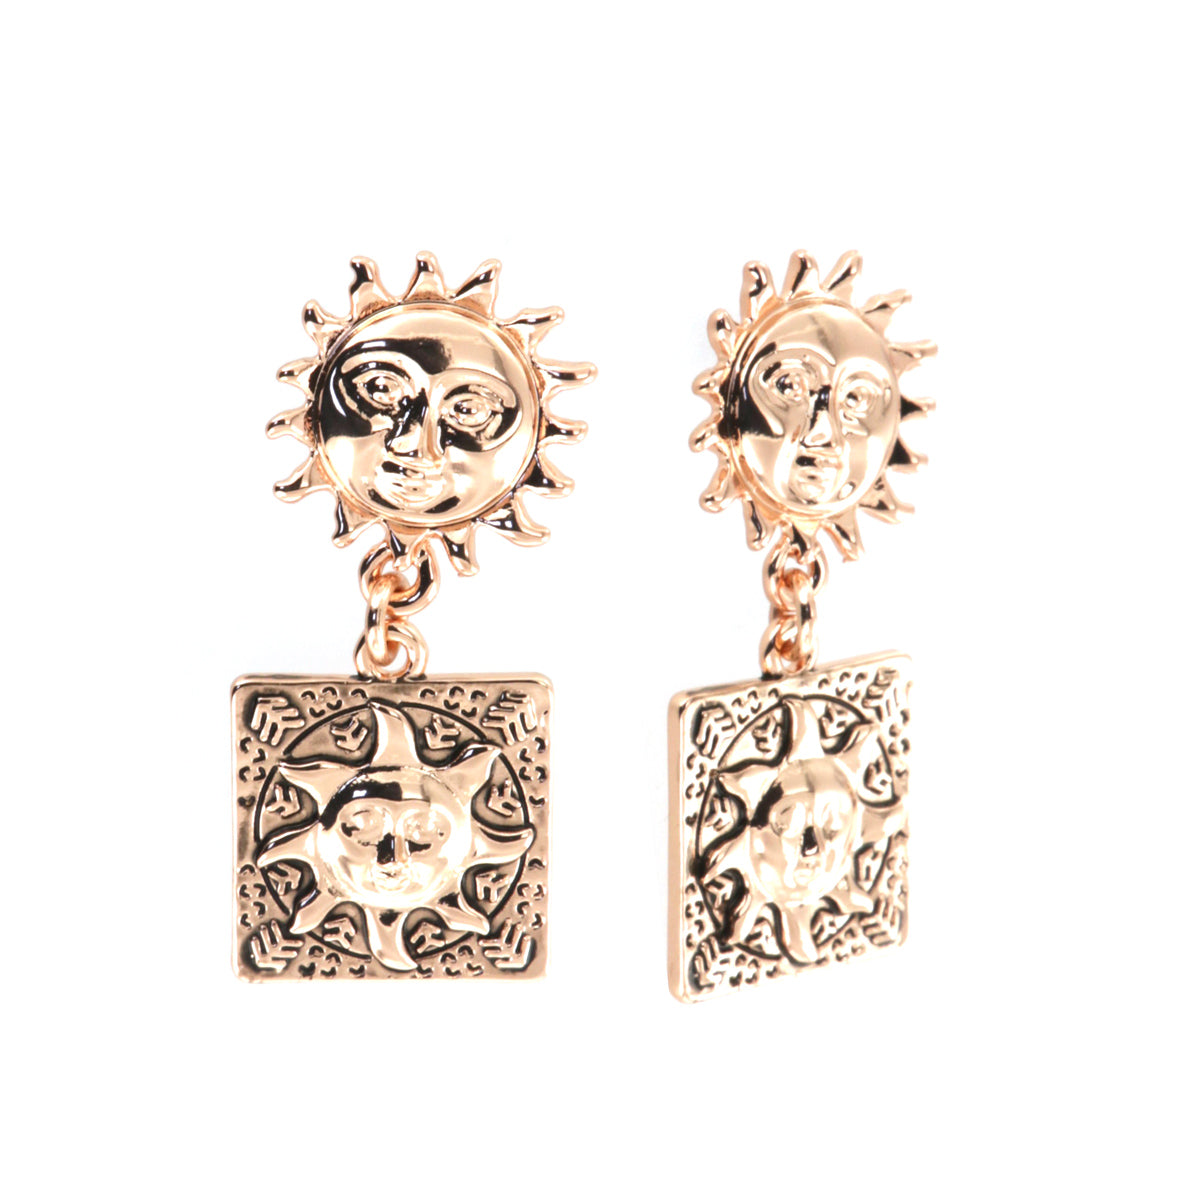 Sun metal earrings with pendant tile in perfect Sicilian style